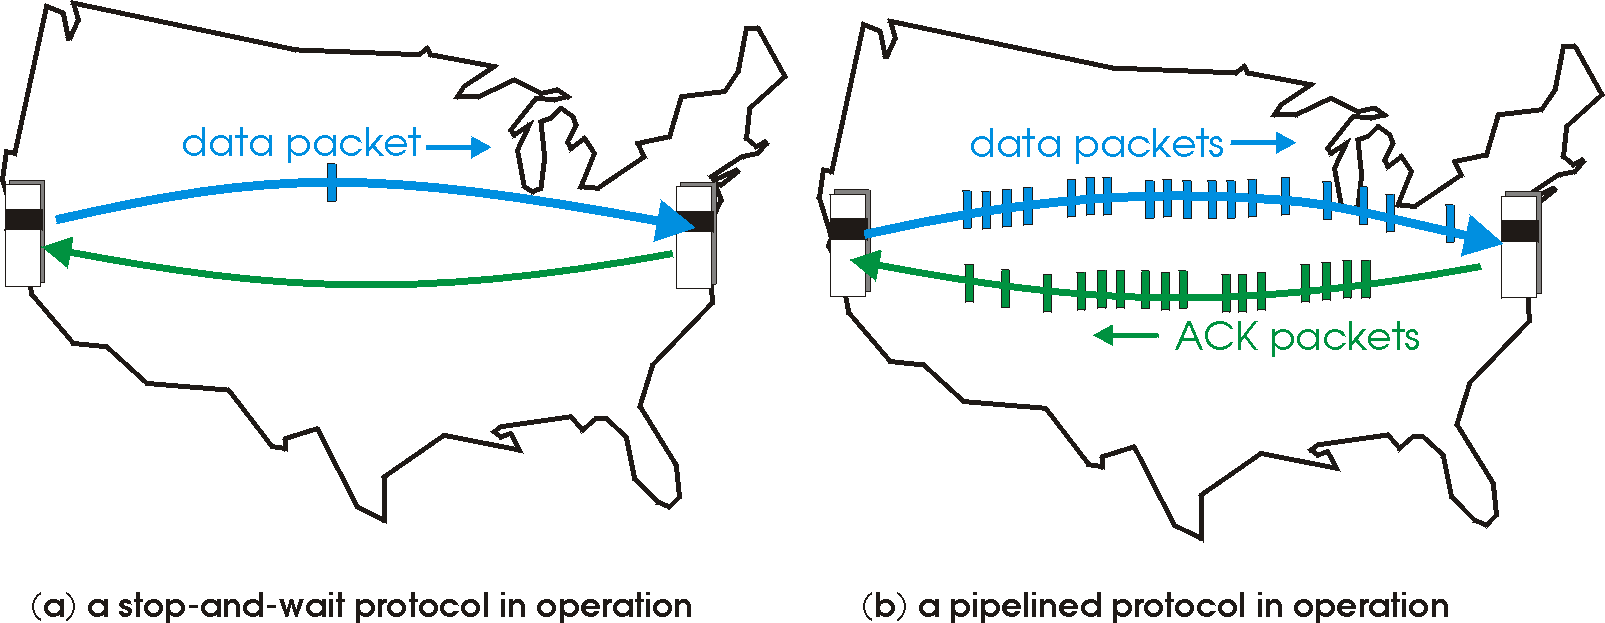 pipelined reliable data transfer